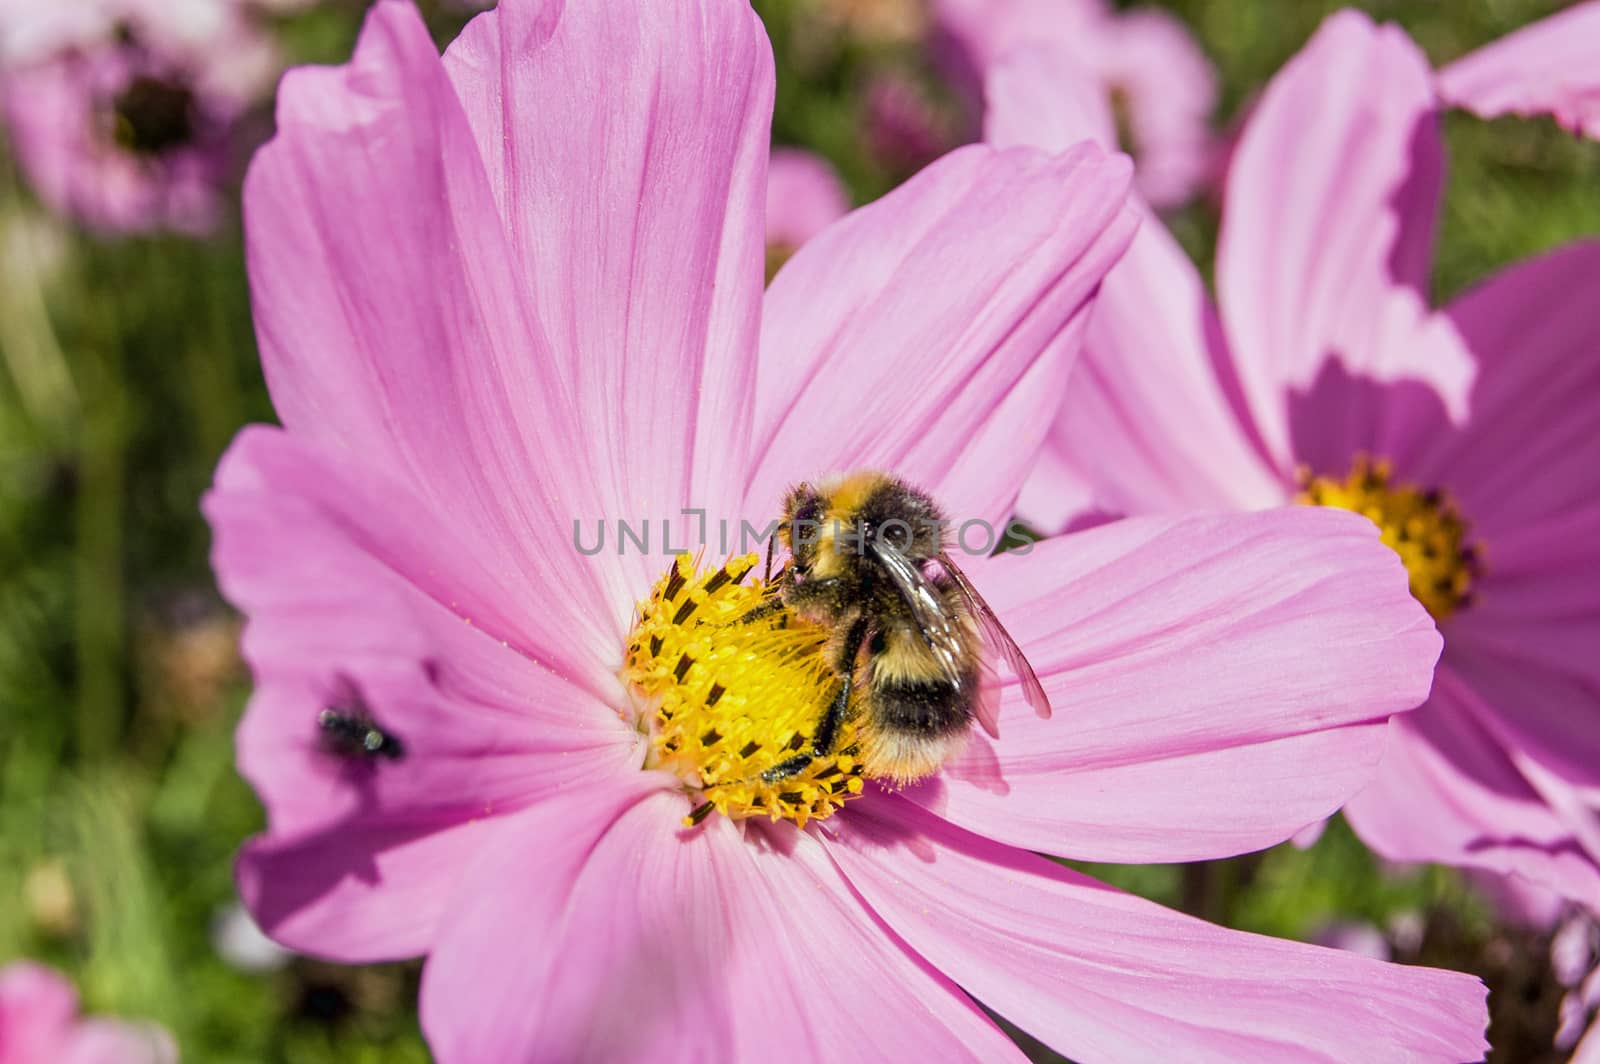 A bumble bee gathering pollen in high summer.